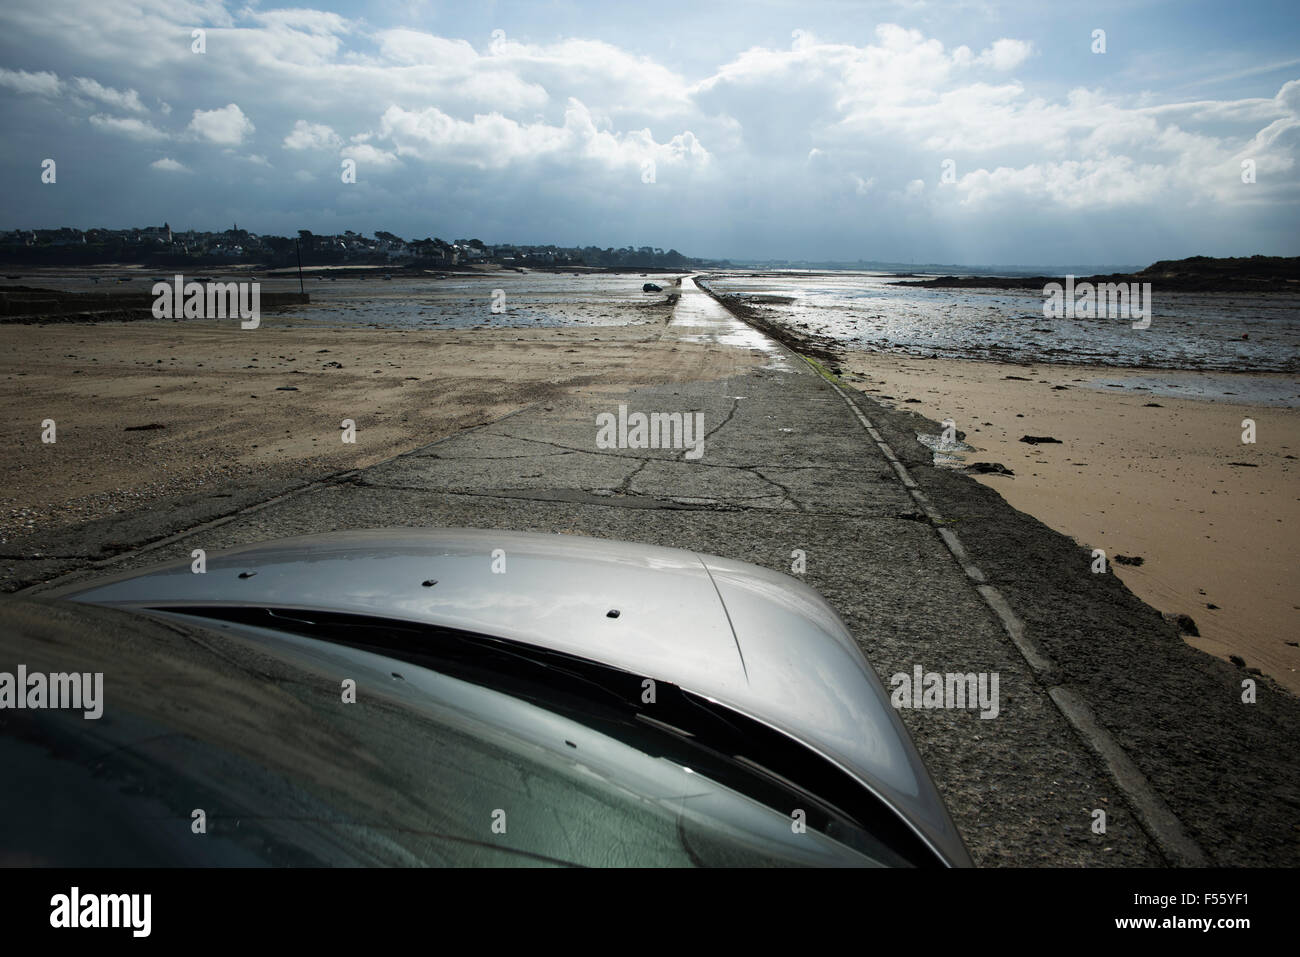 Carantec, Ile Callot, Brittany,France. October 2015 The road is submerged at high tide, at low tide walking the sea floor Stock Photo